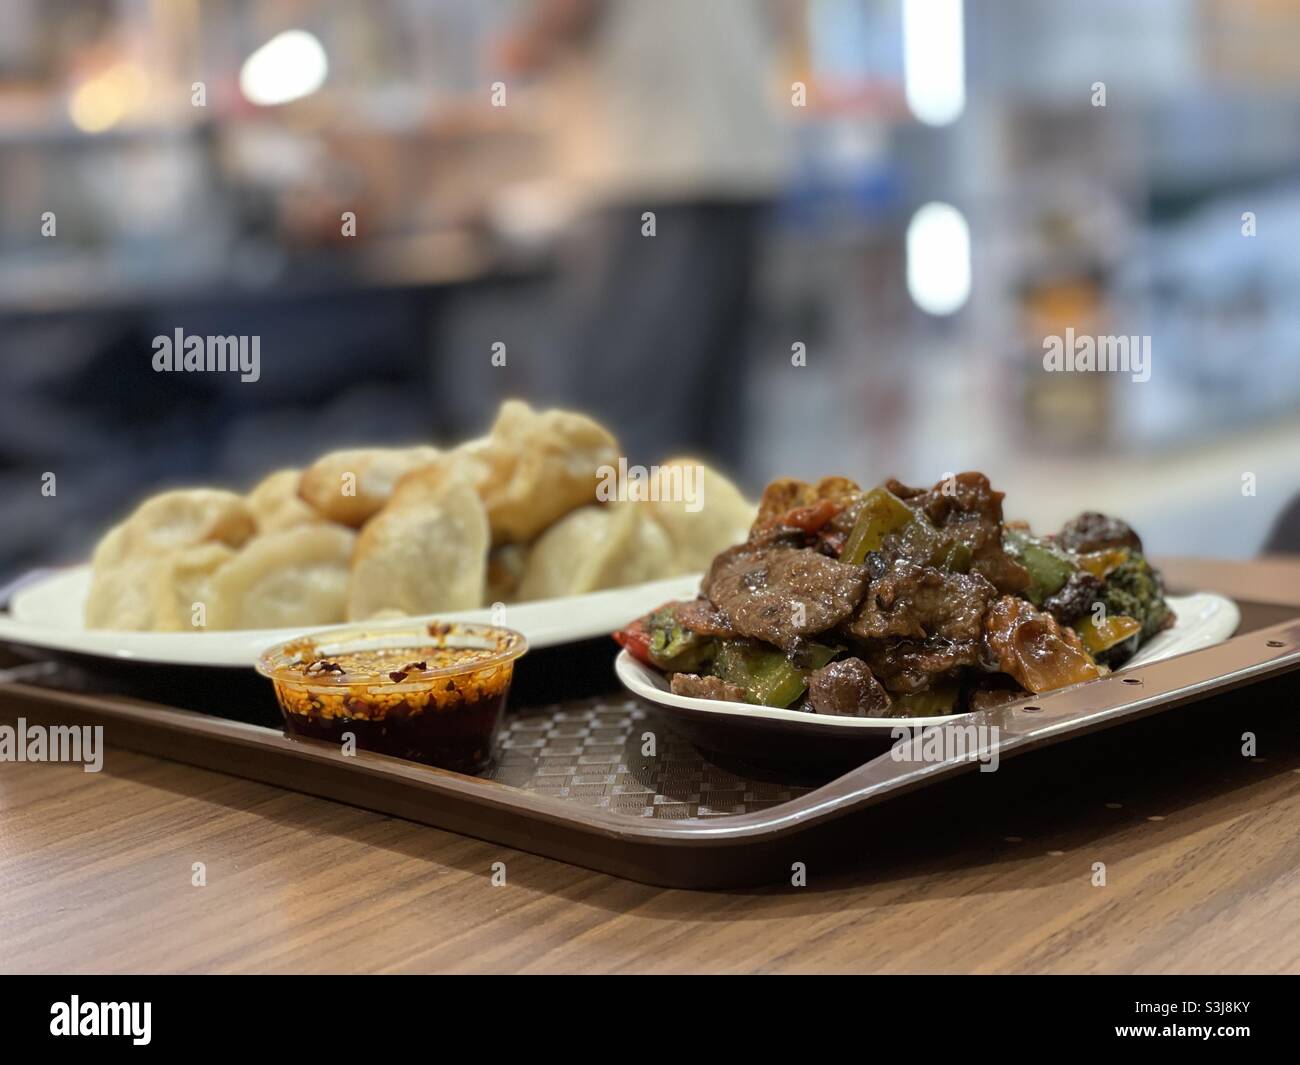 Plates of pan fried dumplings and chili and sesame seed sauce and stir fry beef and black beans Stock Photo